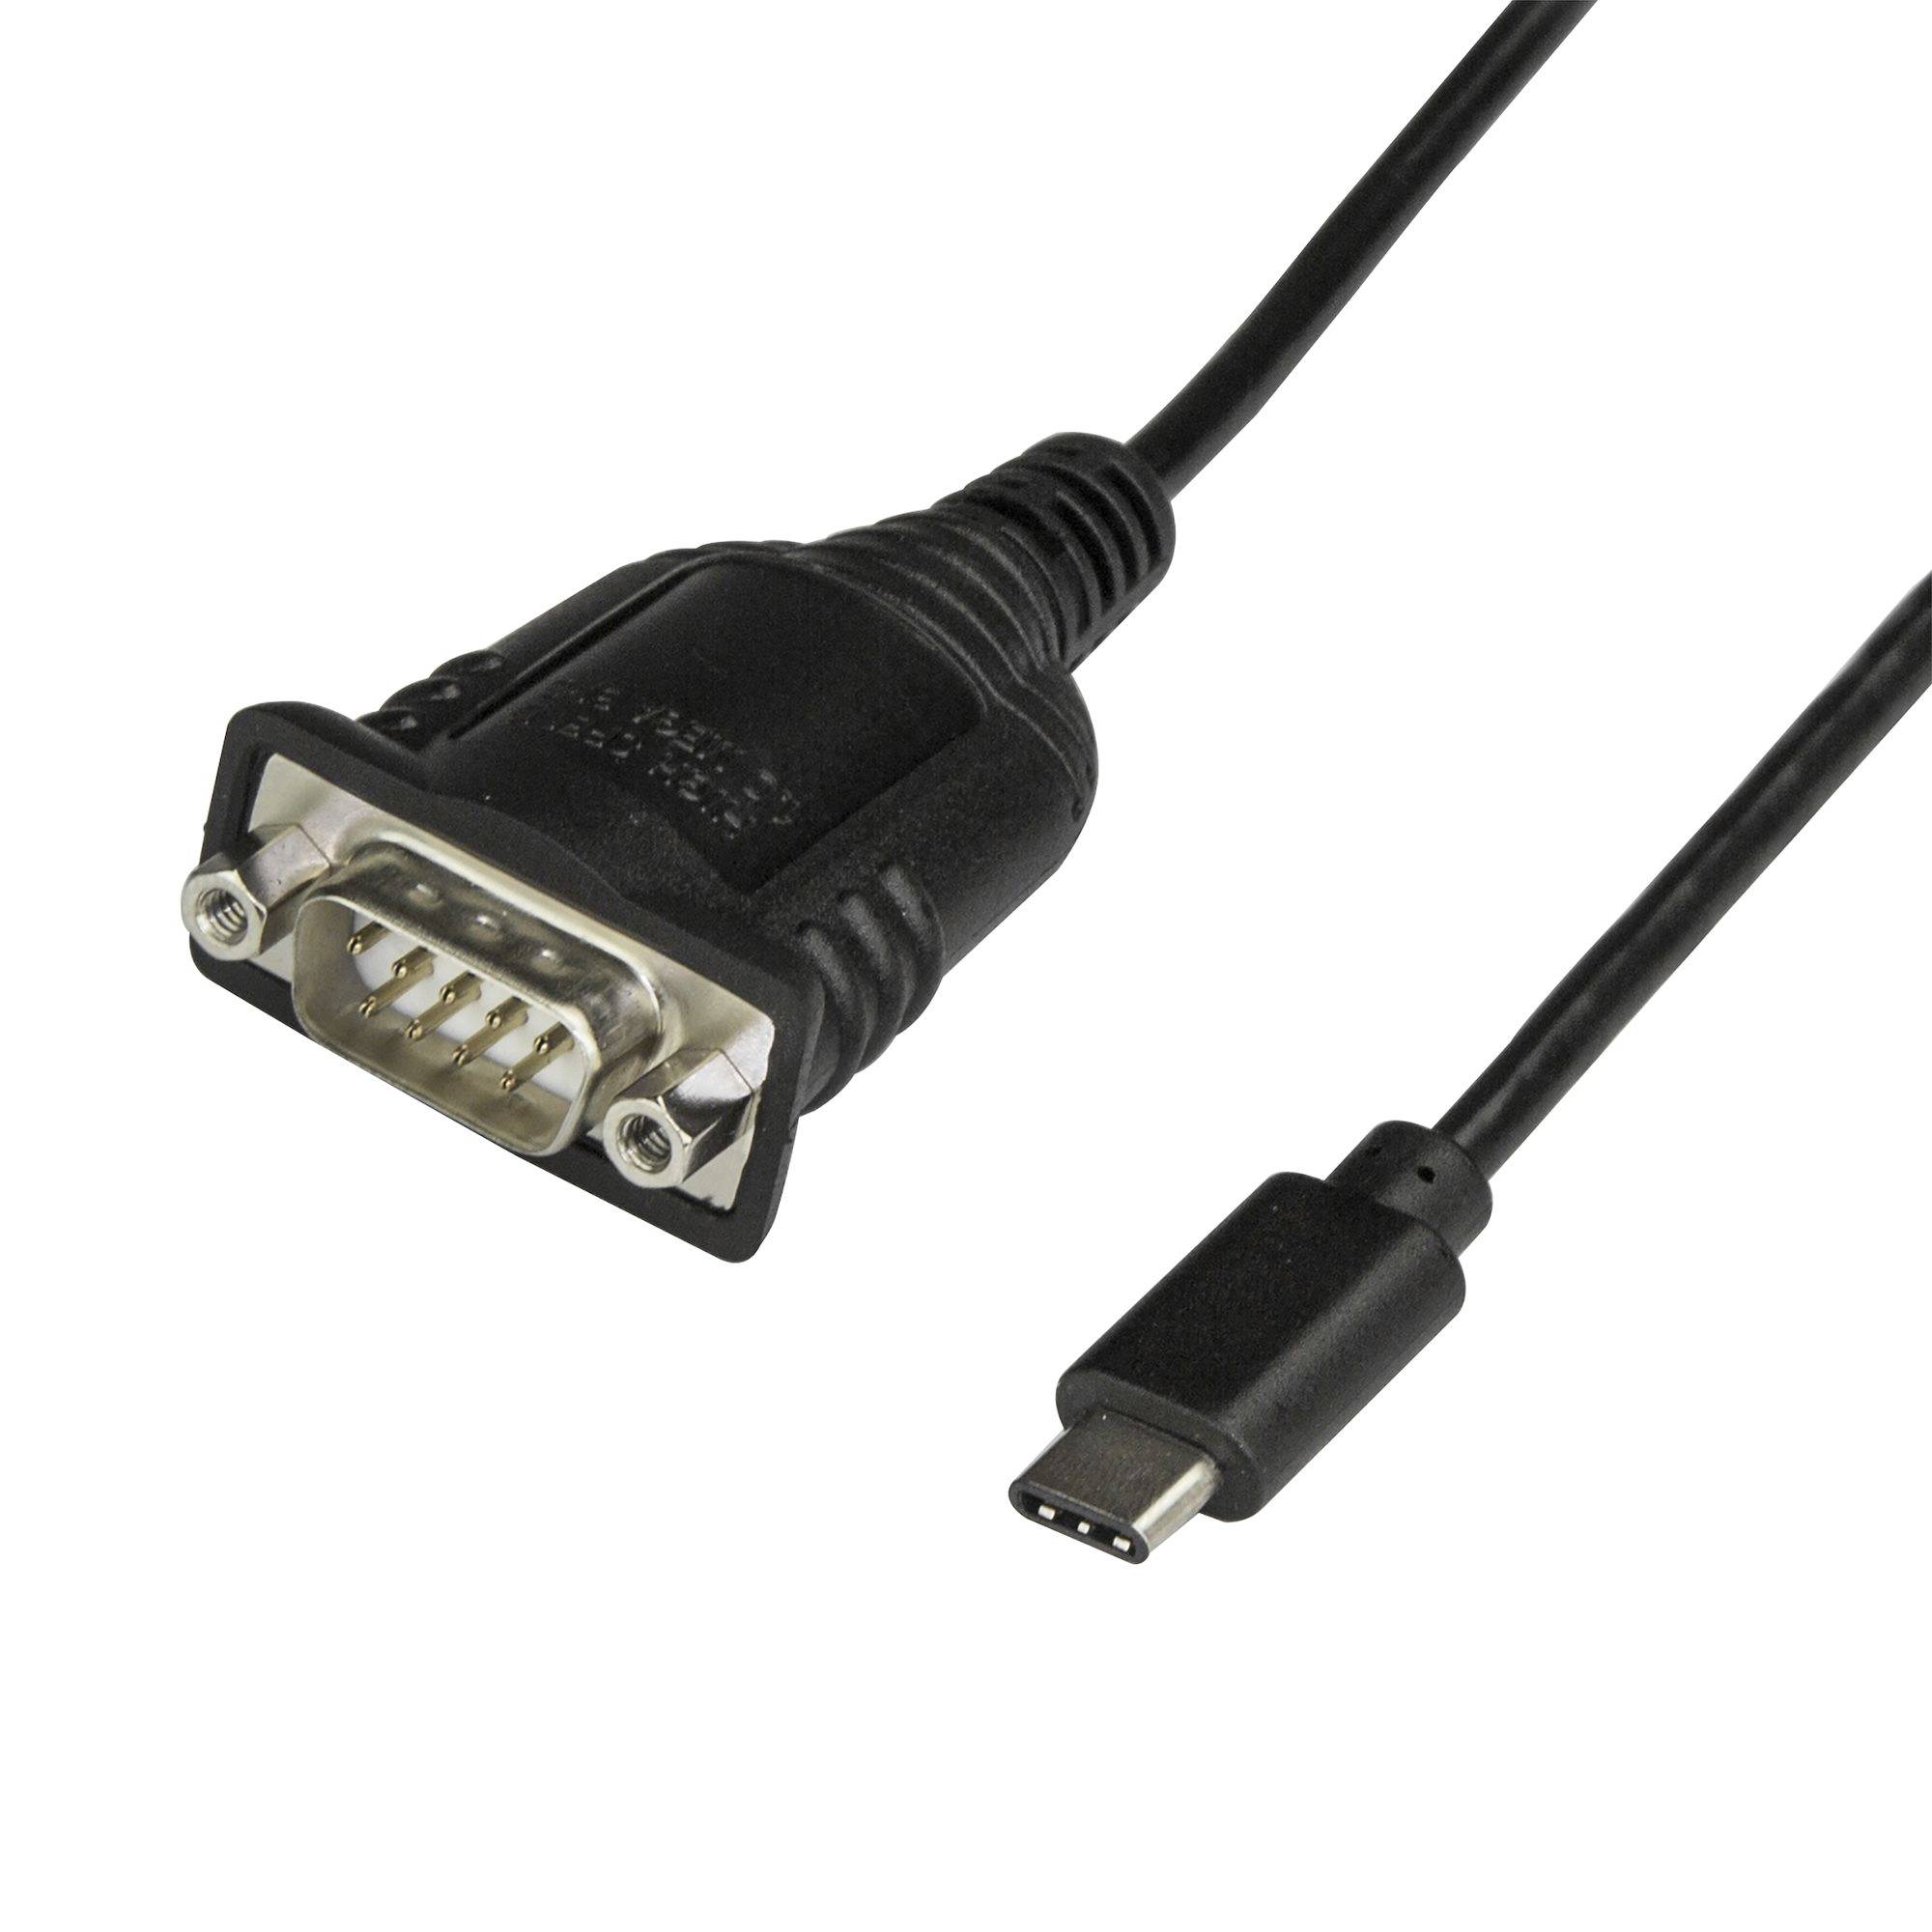 Rca Informatique - Image du produit : UCB C TO SERIAL ADAPTER USB C TO RS232 CABLE